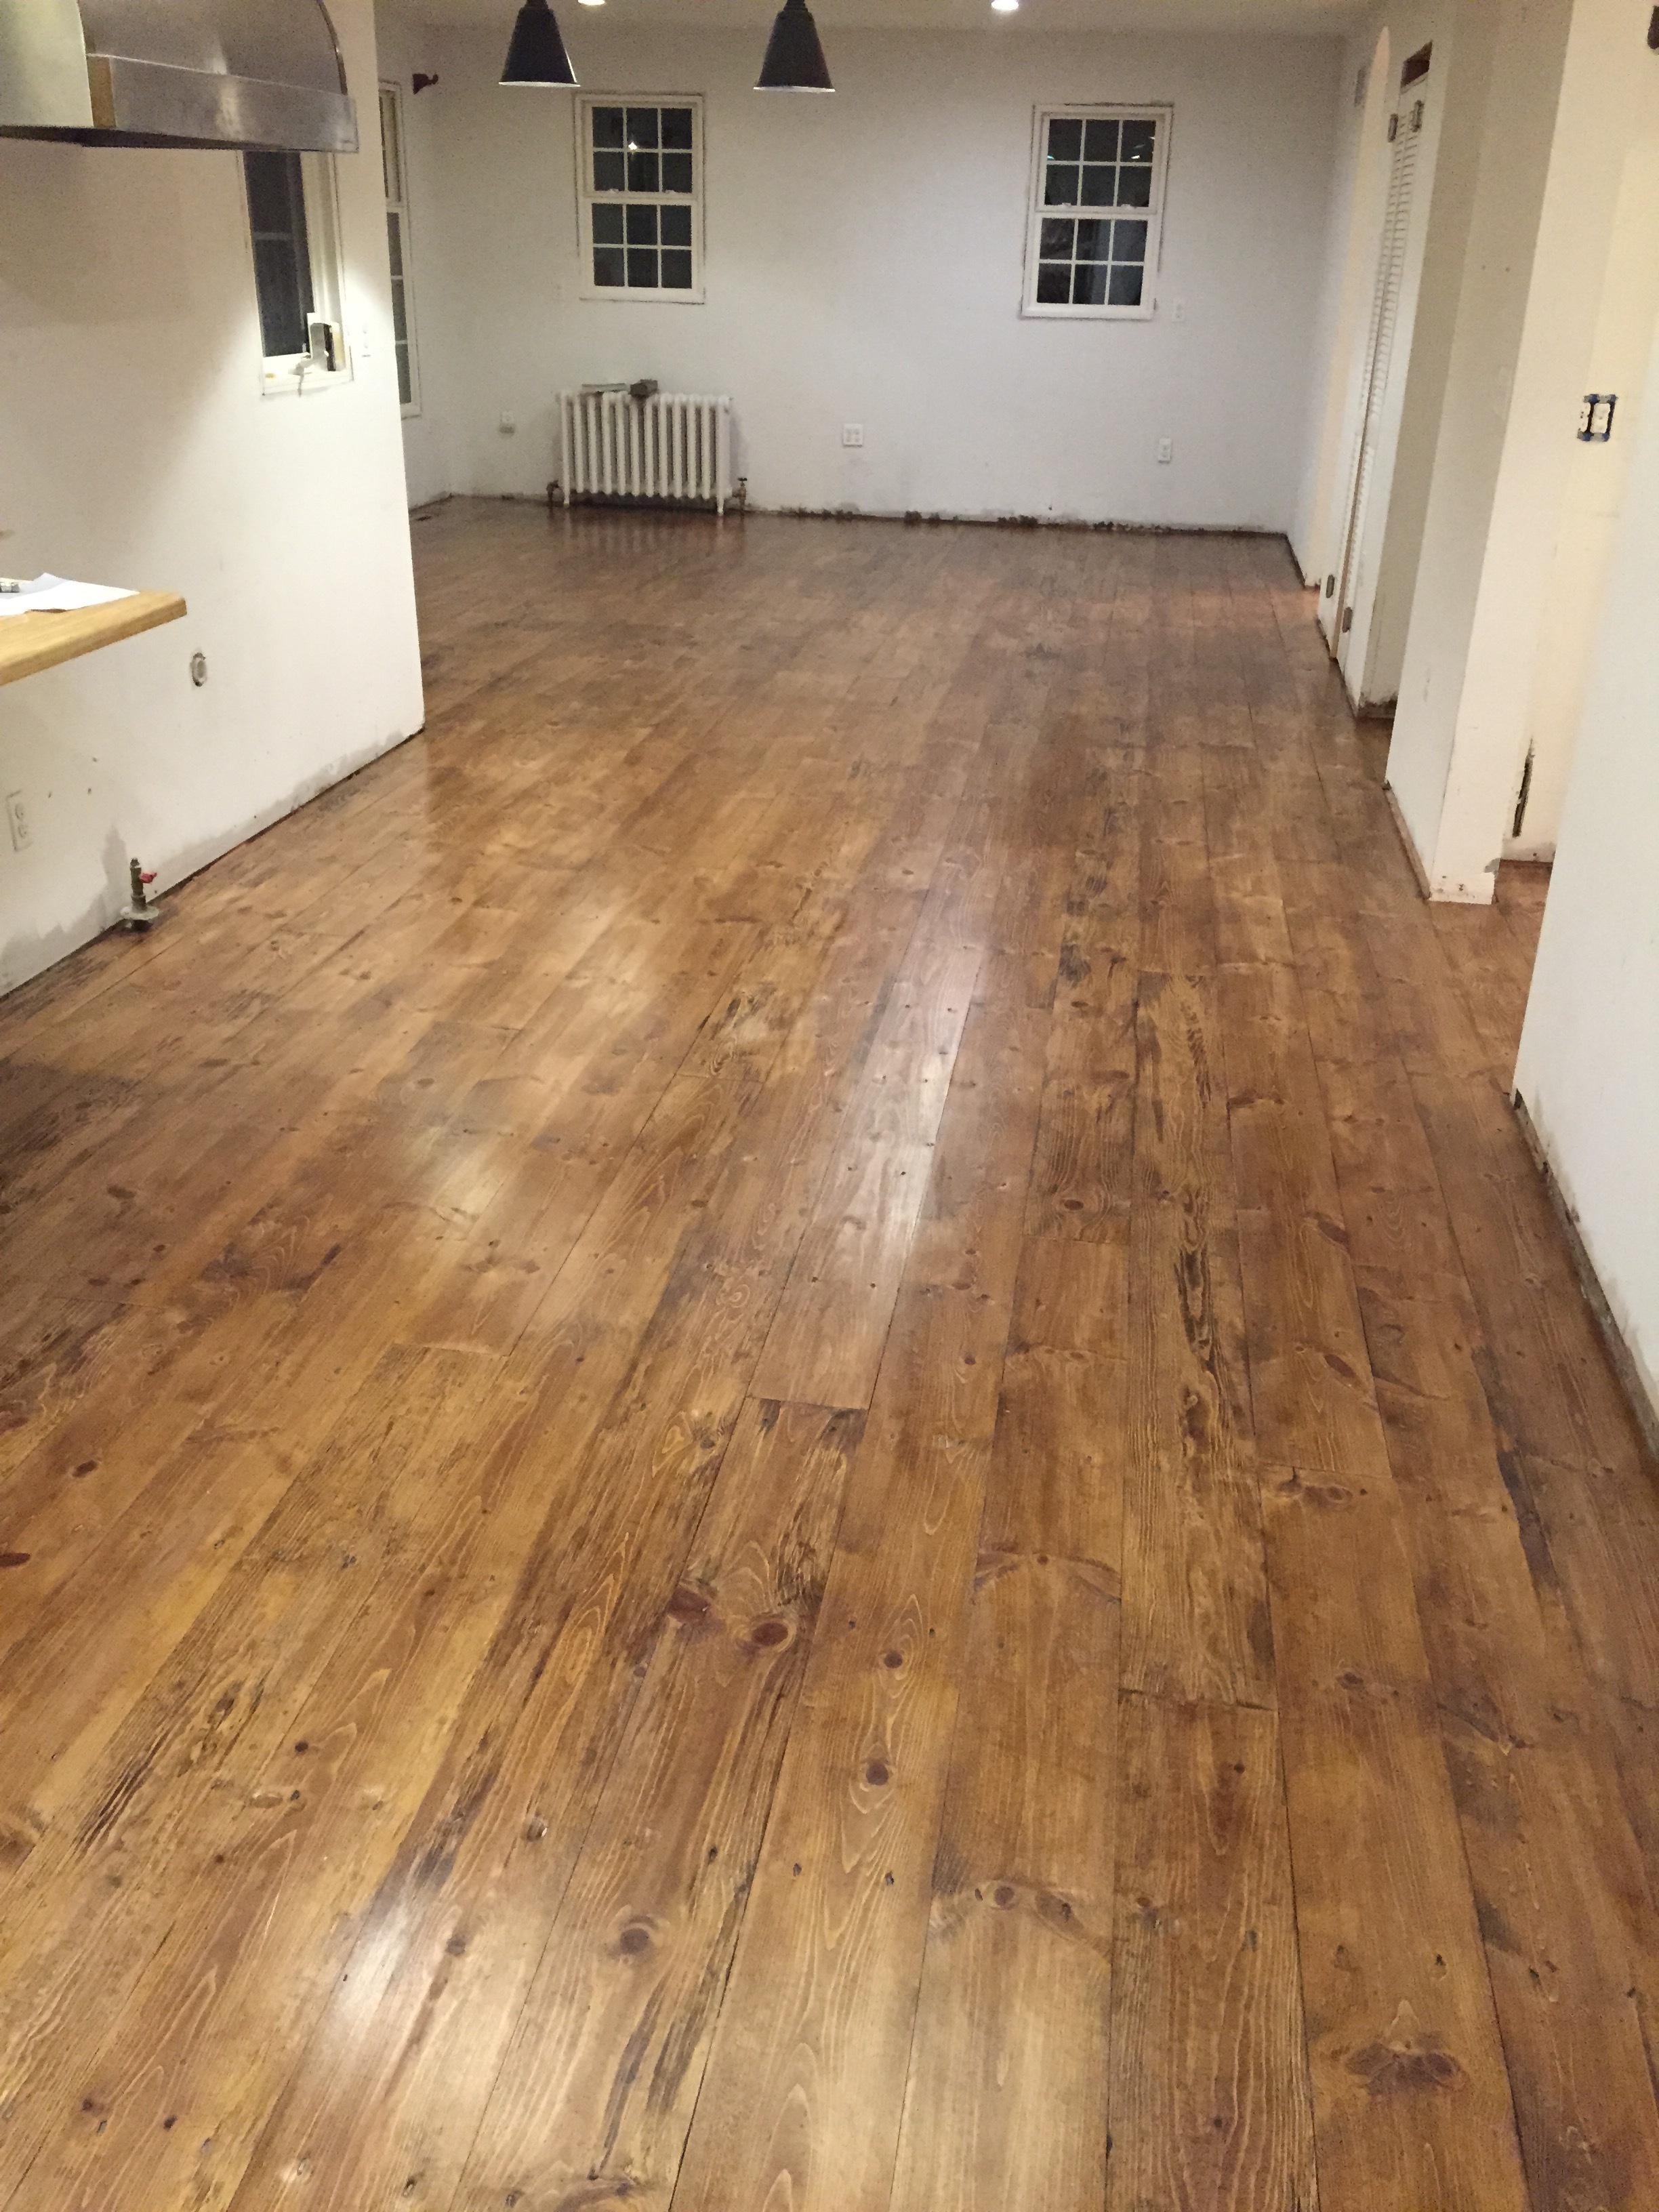  After staining and a few coats of polyurethane, the floors were finished.&nbsp; 